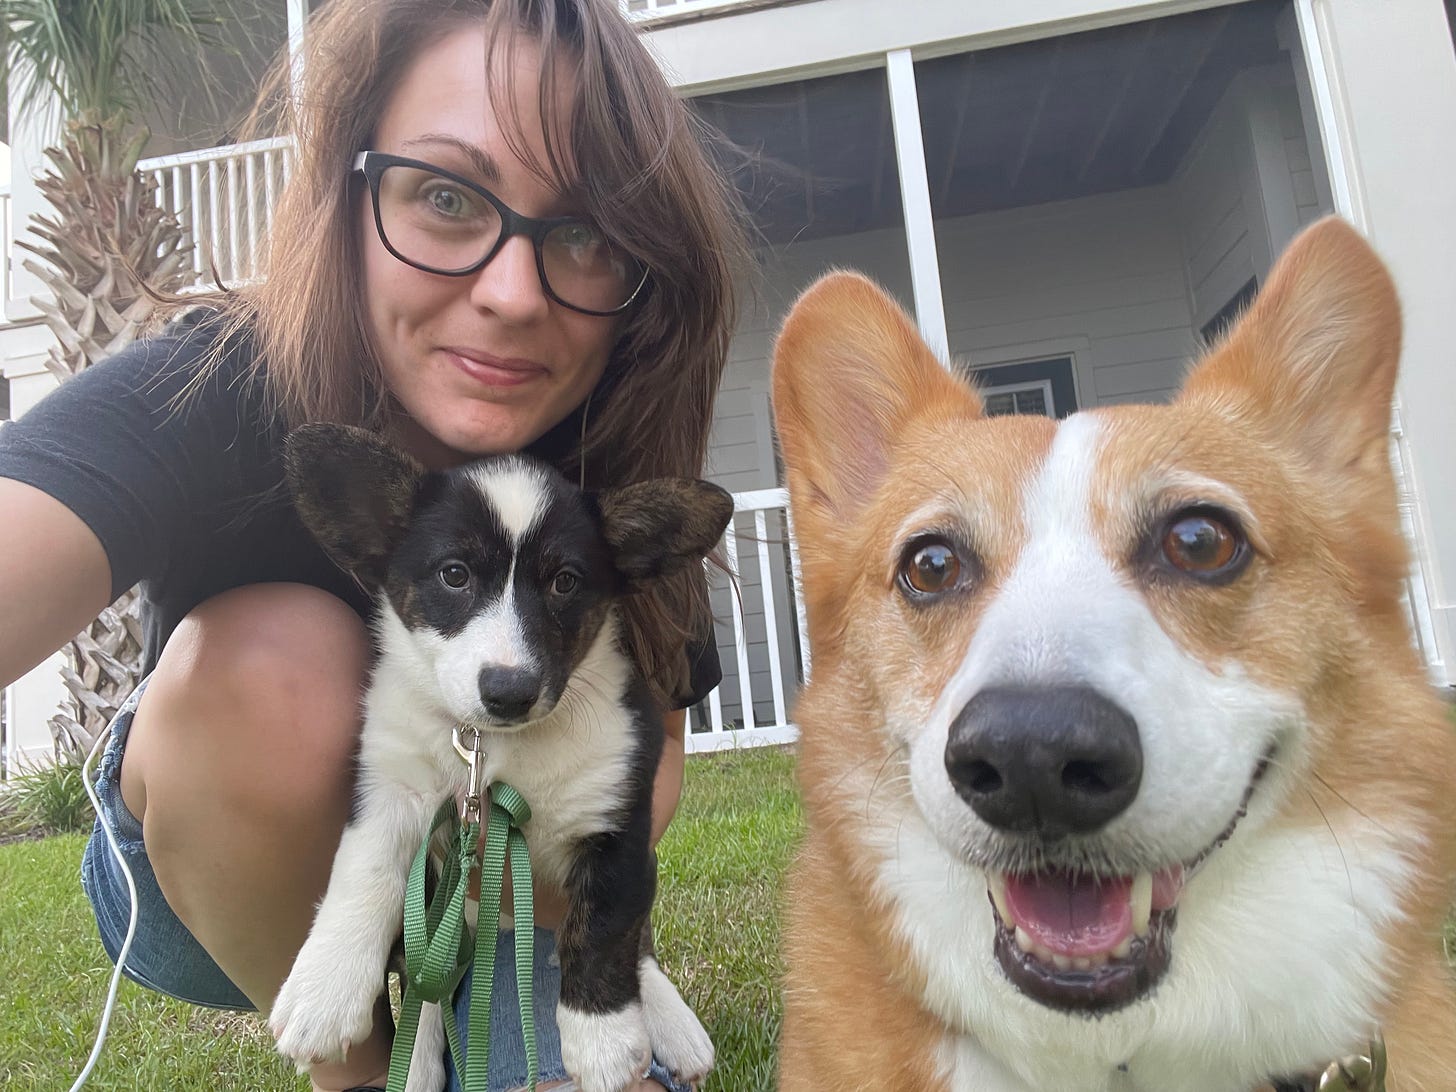 A photo of Kendra taking a selfie with Gwen, a black and white cardigan puppy, and Dylan, a red and white Pembroke Welsh Corgi.